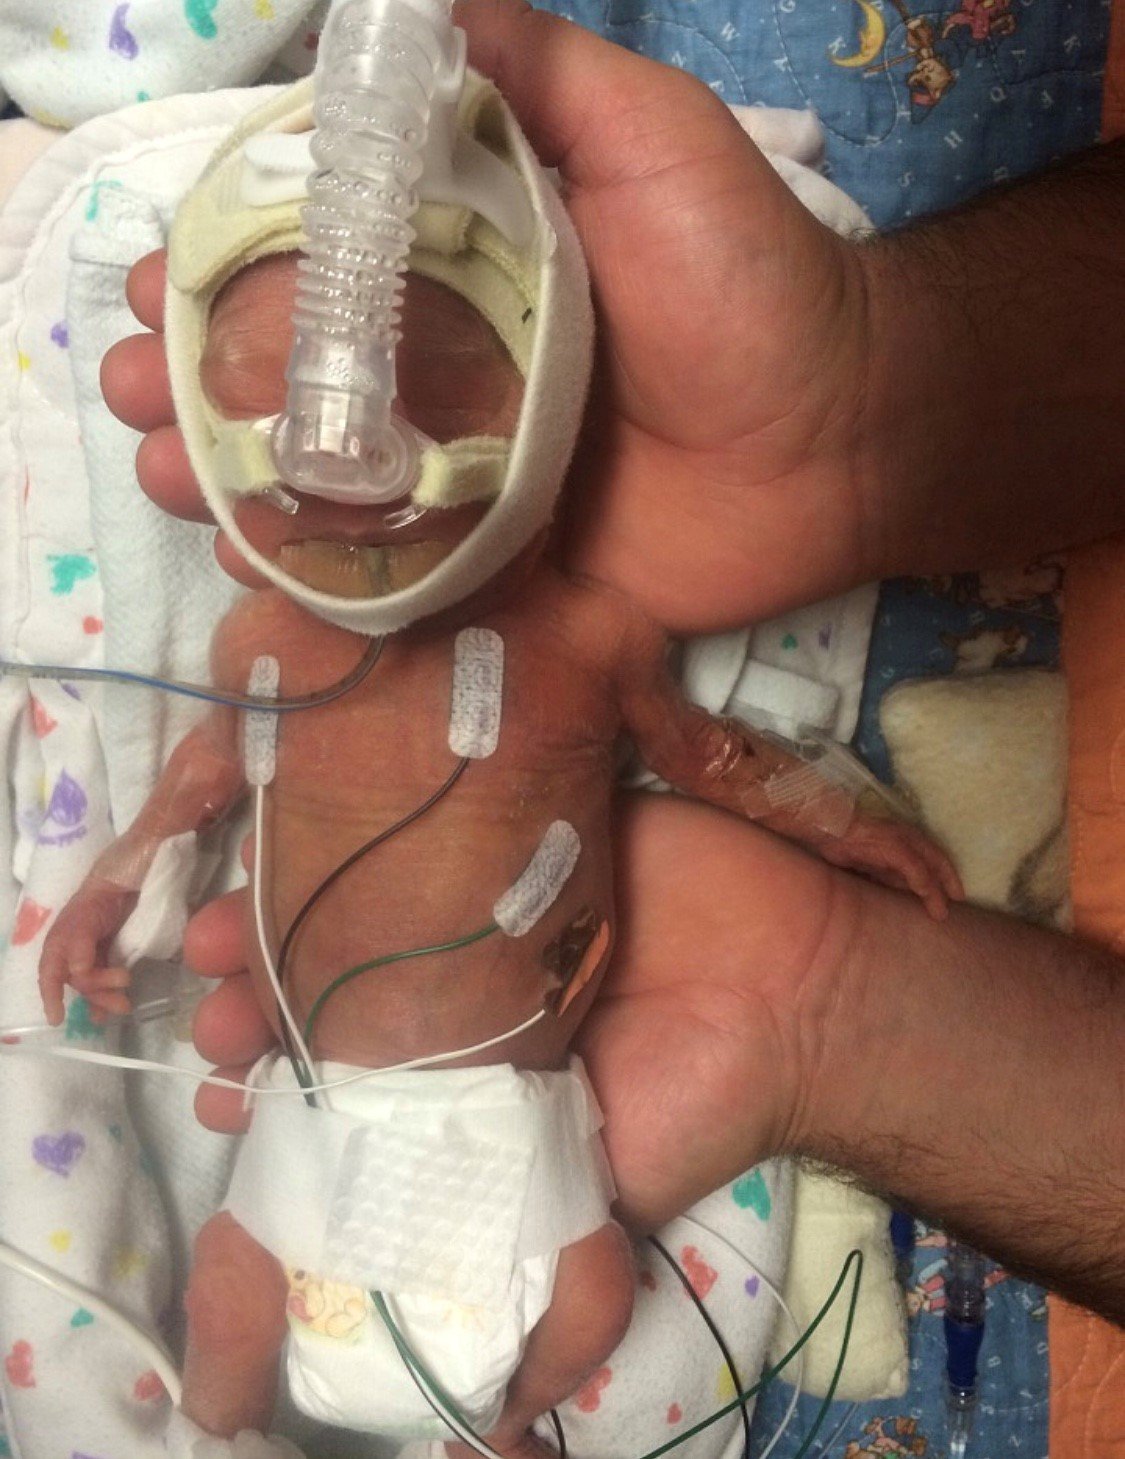 Premature baby hooked up to breathing machine